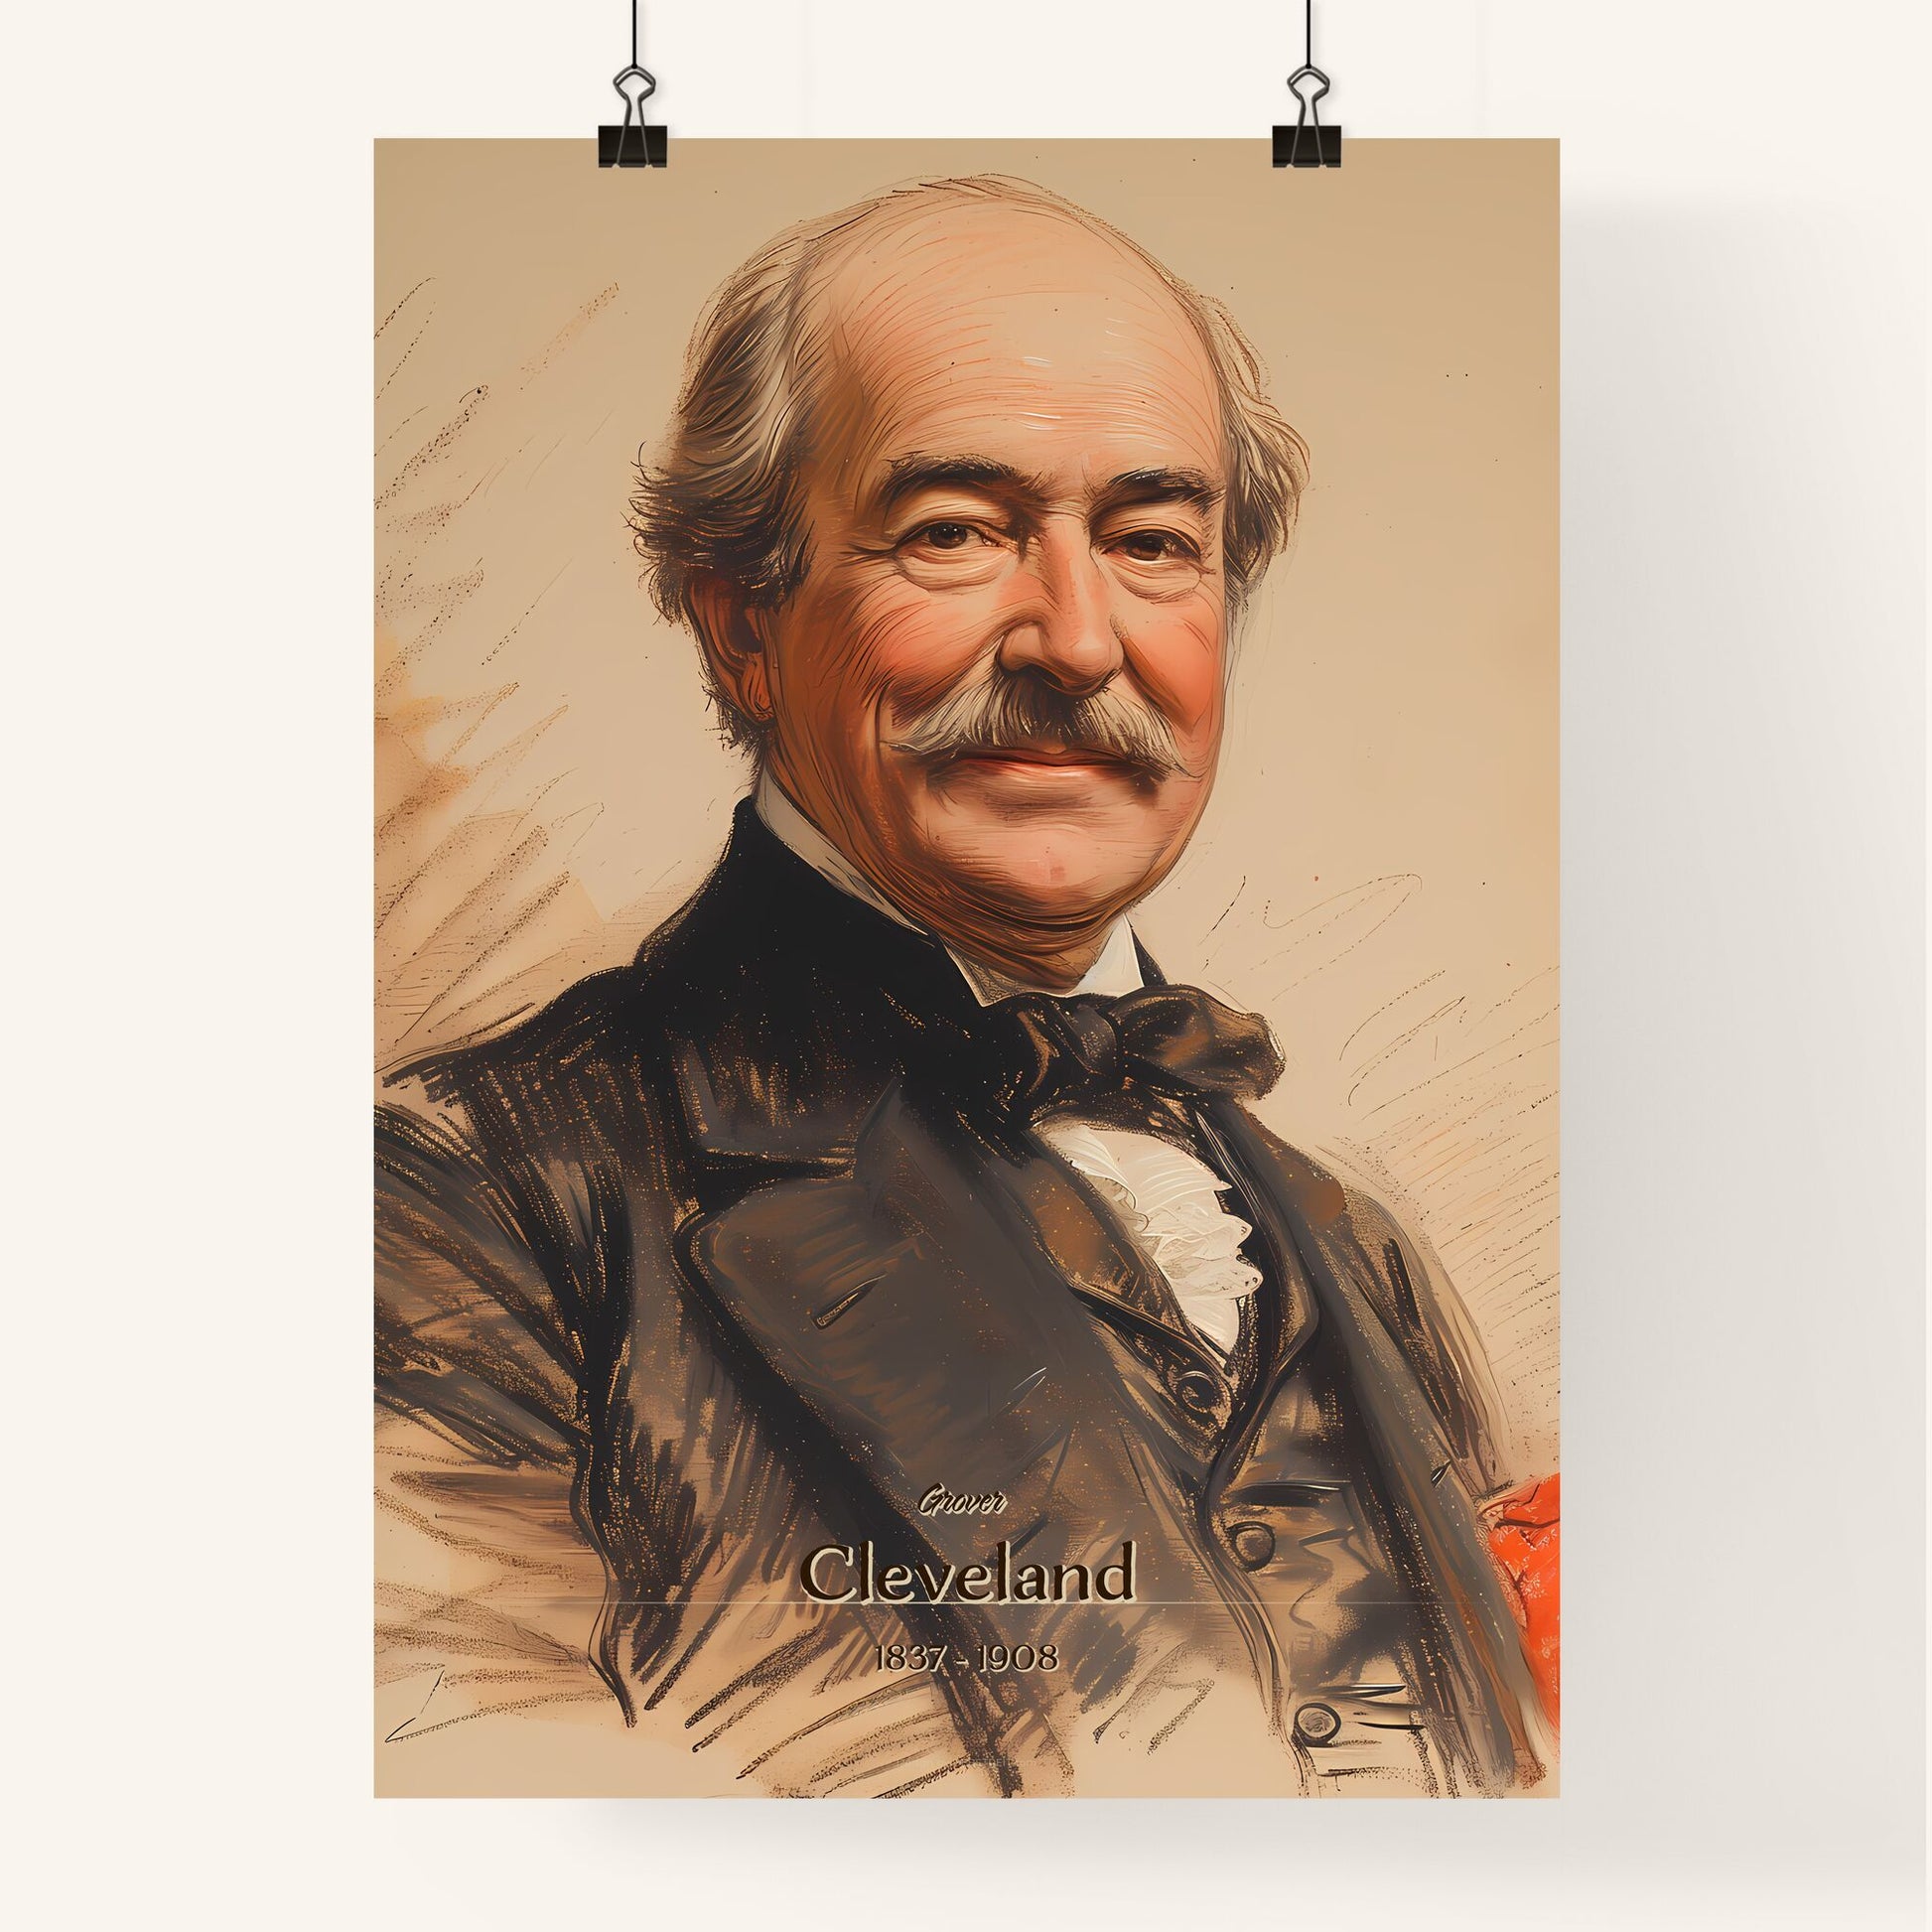 Grover, Cleveland, 1837 - 1908, A Poster of a man with a mustache Default Title